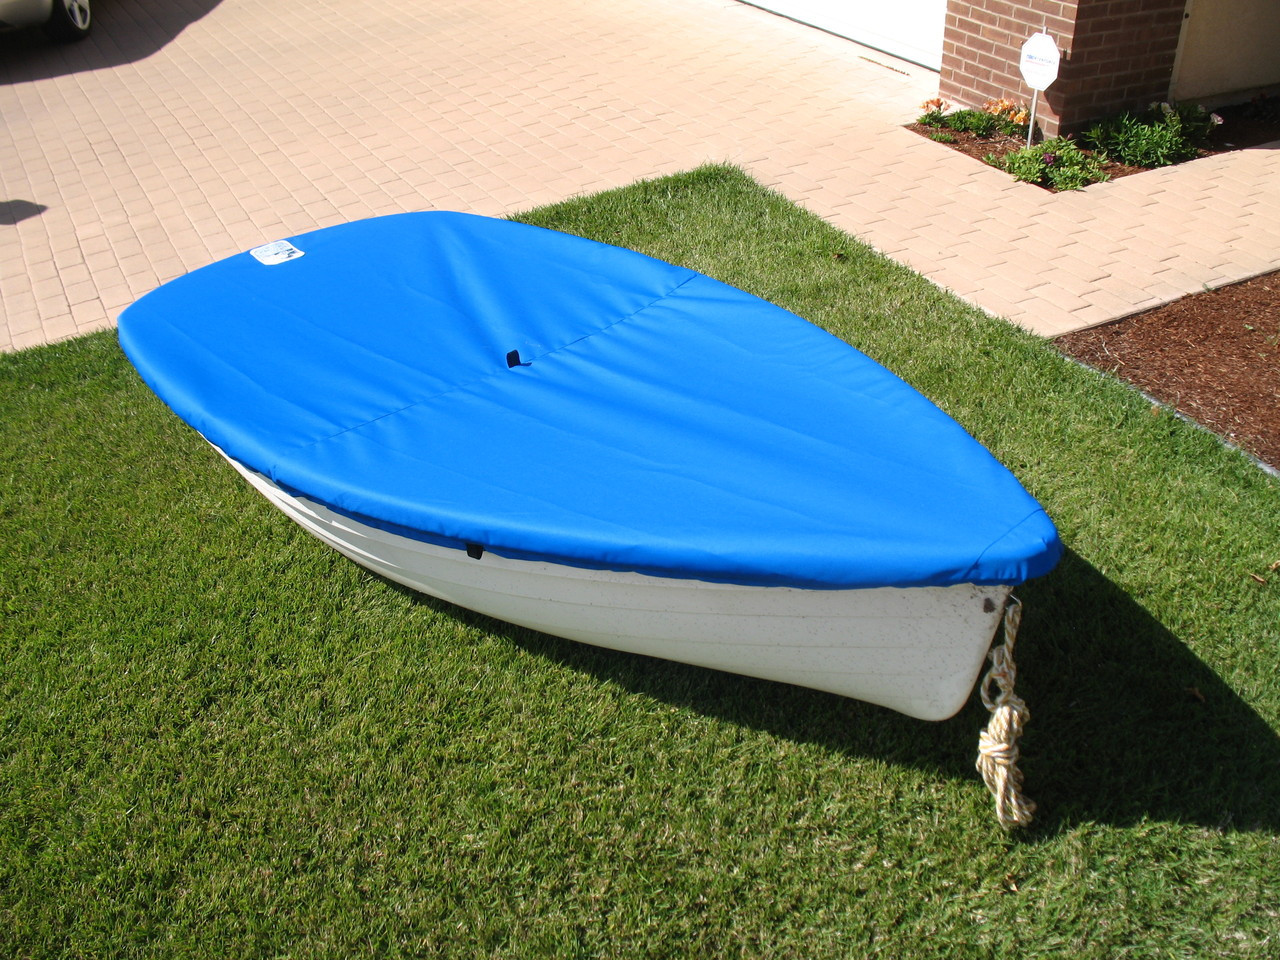 Sailboat Top Deck Cover made in America by skilled artisans at SLO Sail and Canvas. Shown in Polyester Royal Blue. Available in 3 fabrics and many color choices.

